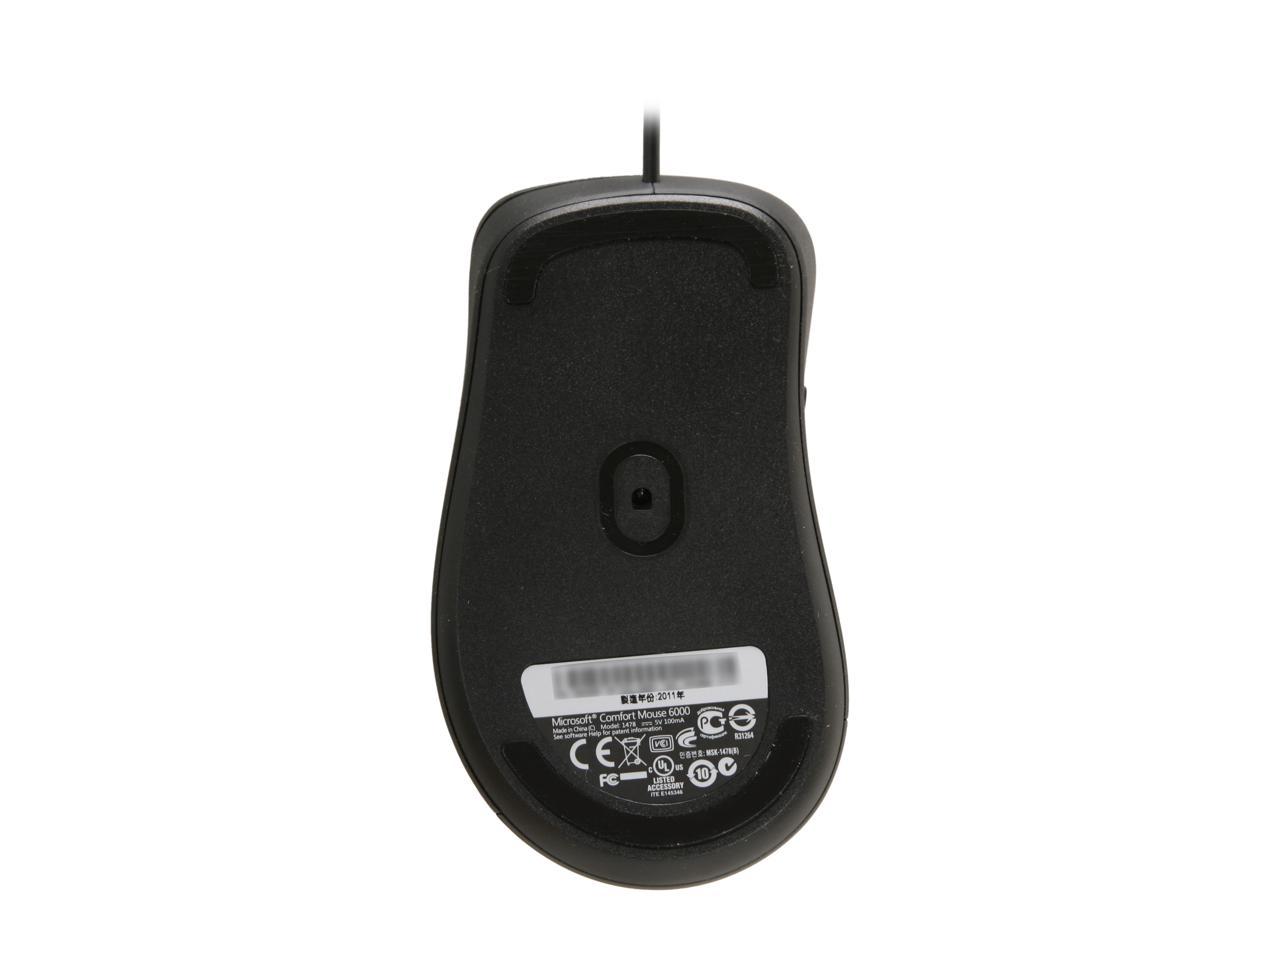 Microsoft Comfort Mouse 6000 S7J-00001 Black 1 x Wheel USB Wired BlueTrack  Mouse